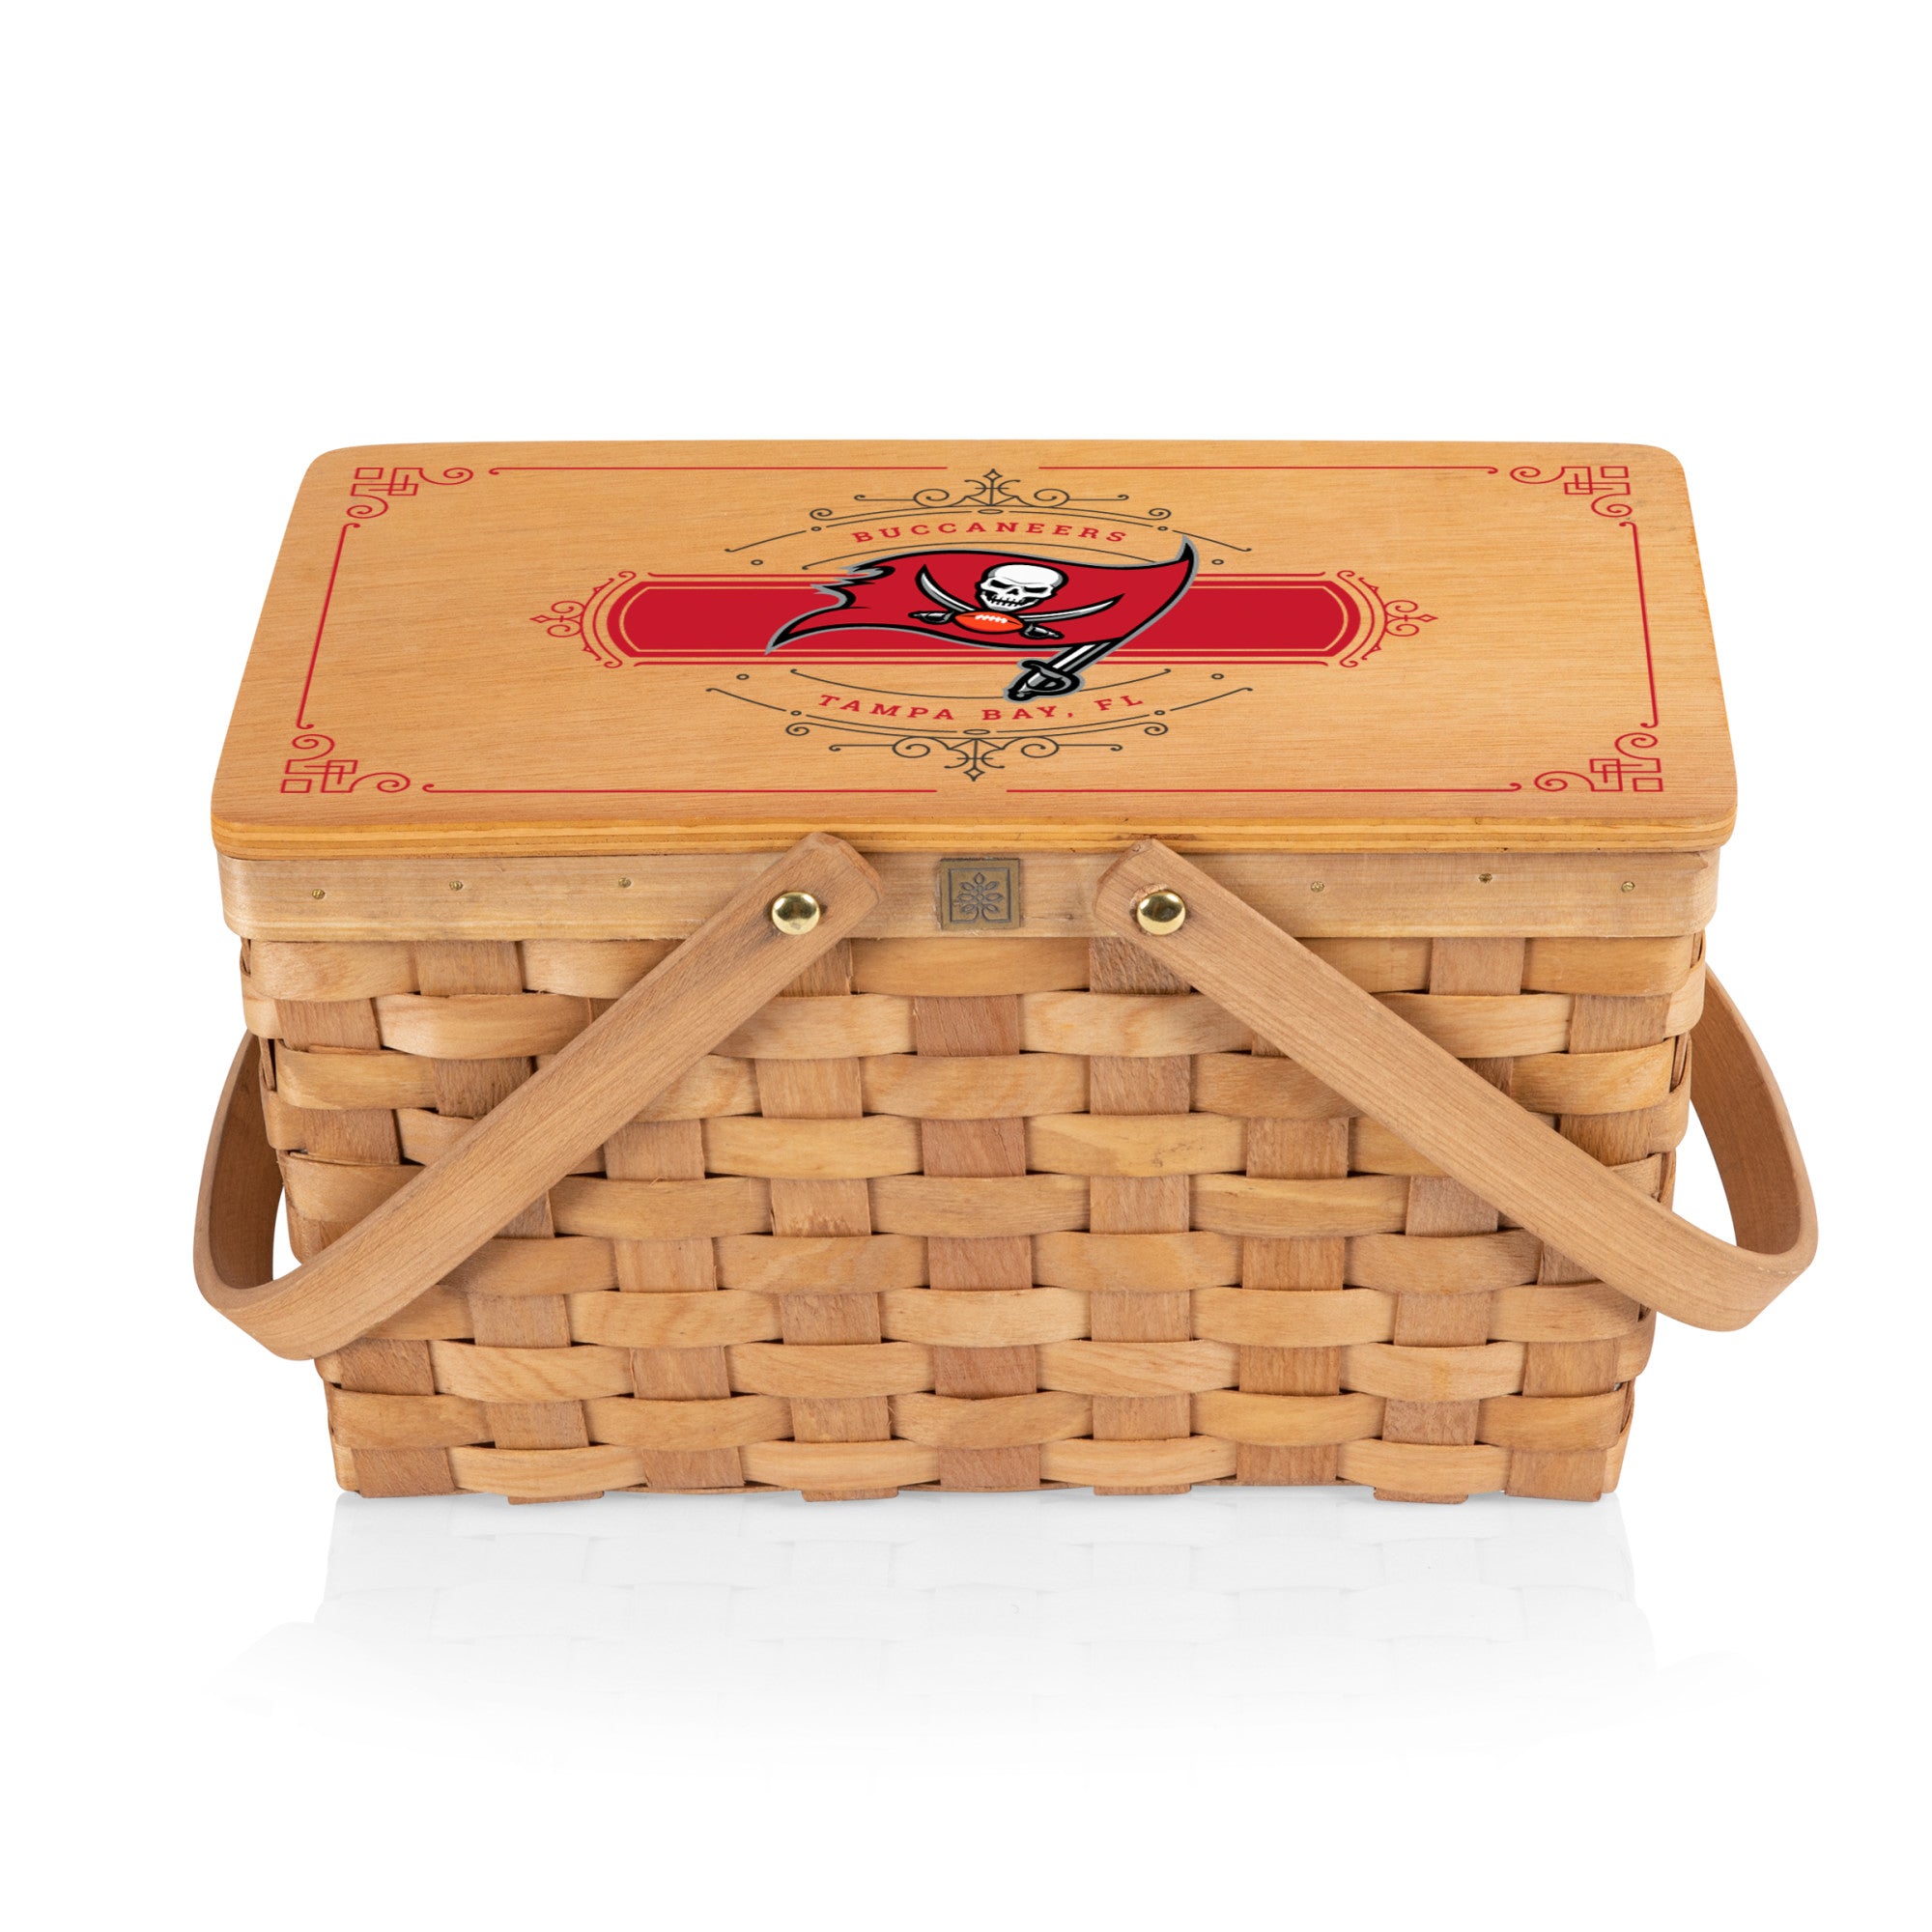 Tampa Bay Buccaneers - Poppy Personal Picnic Basket